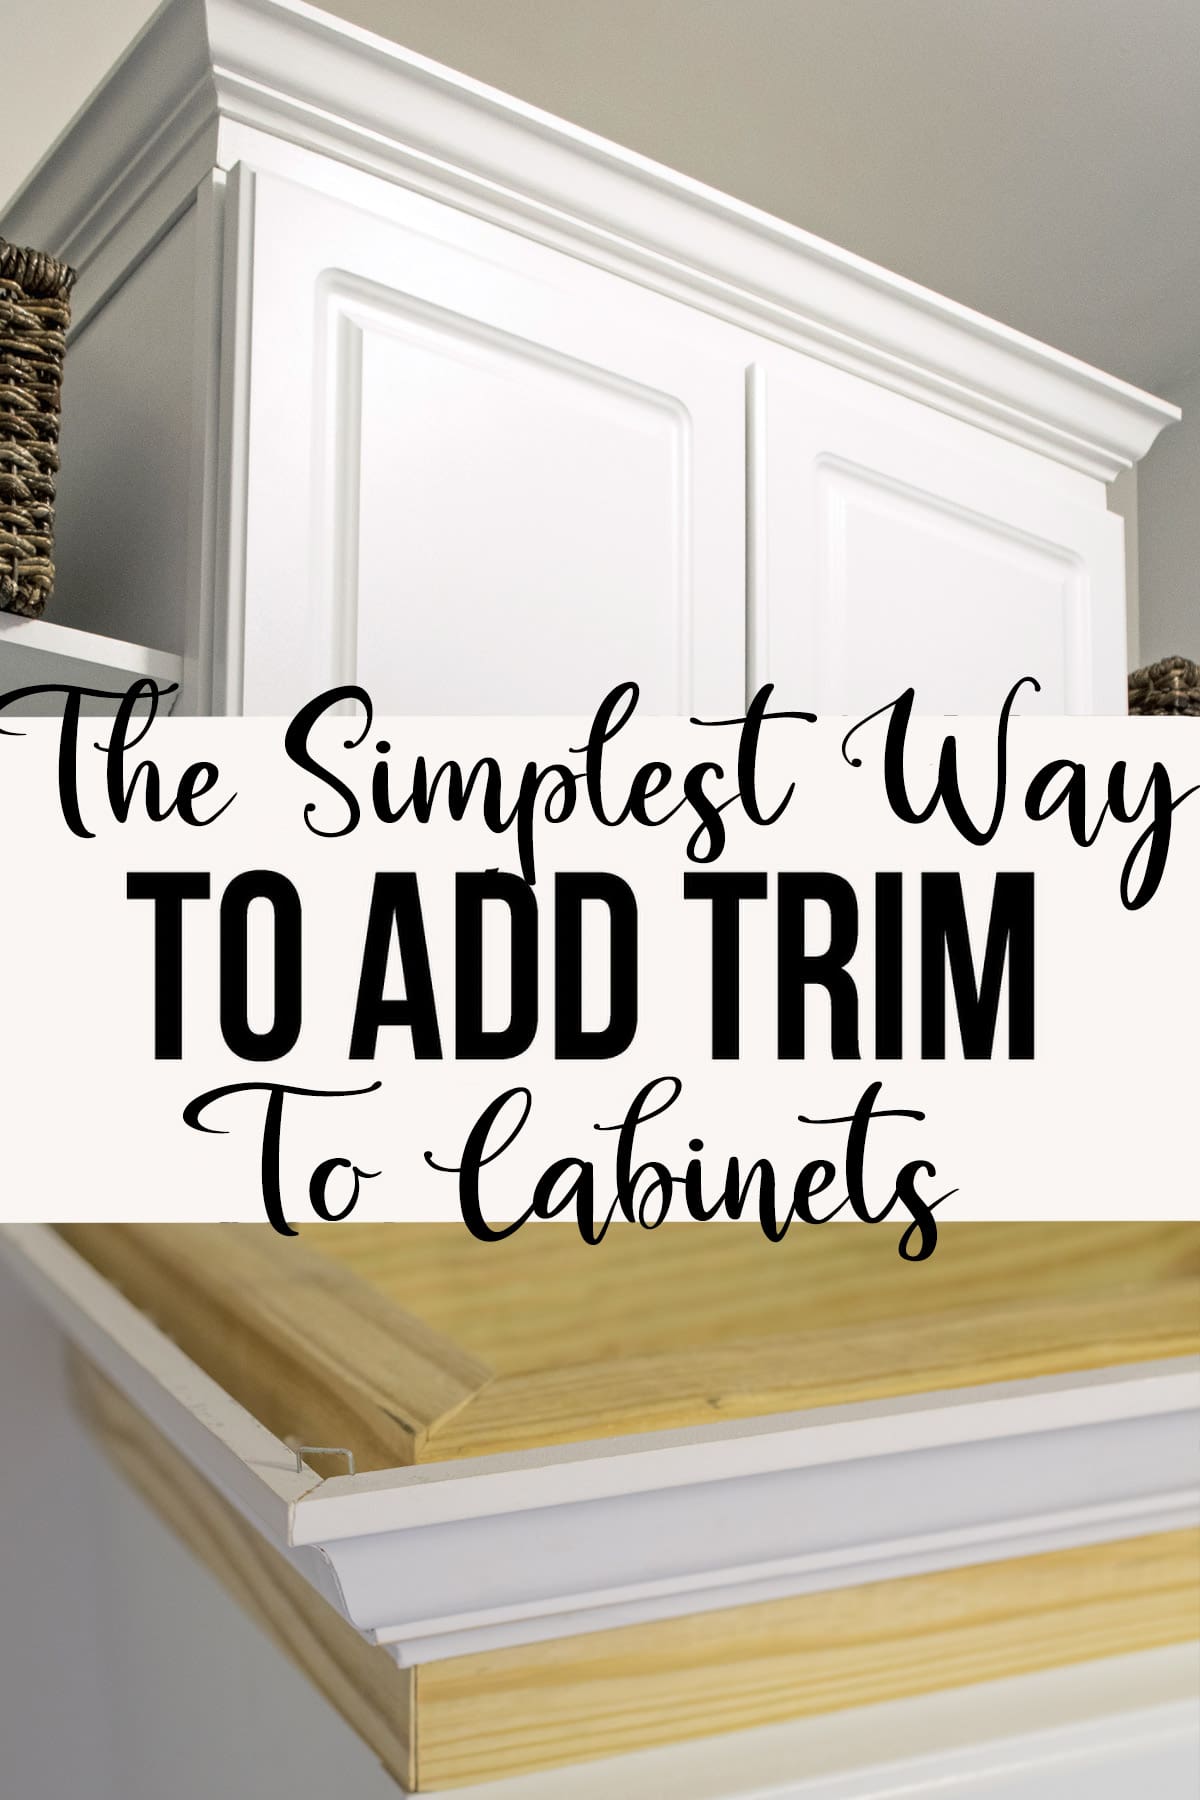 Install Crown Molding On Cabinets, Kitchen Cabinets With Decorative Molding